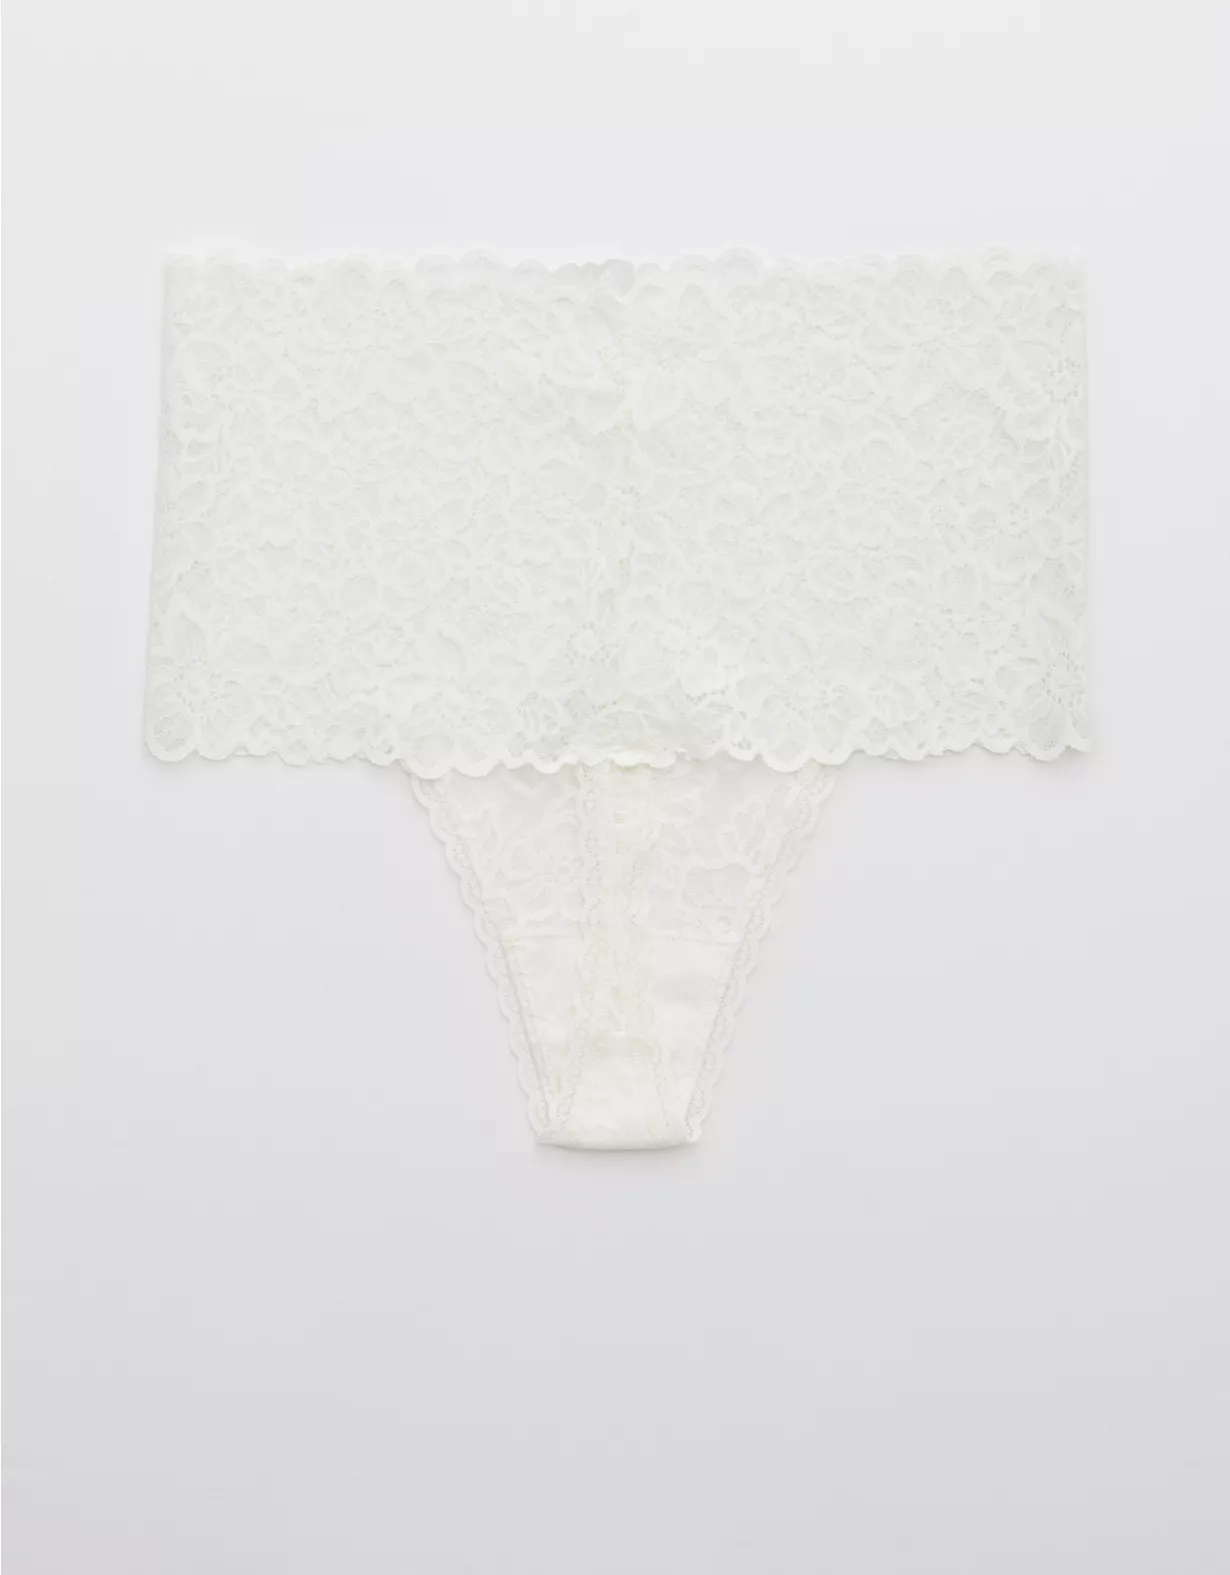 Aerie Tinsel Lace Thong Underwear